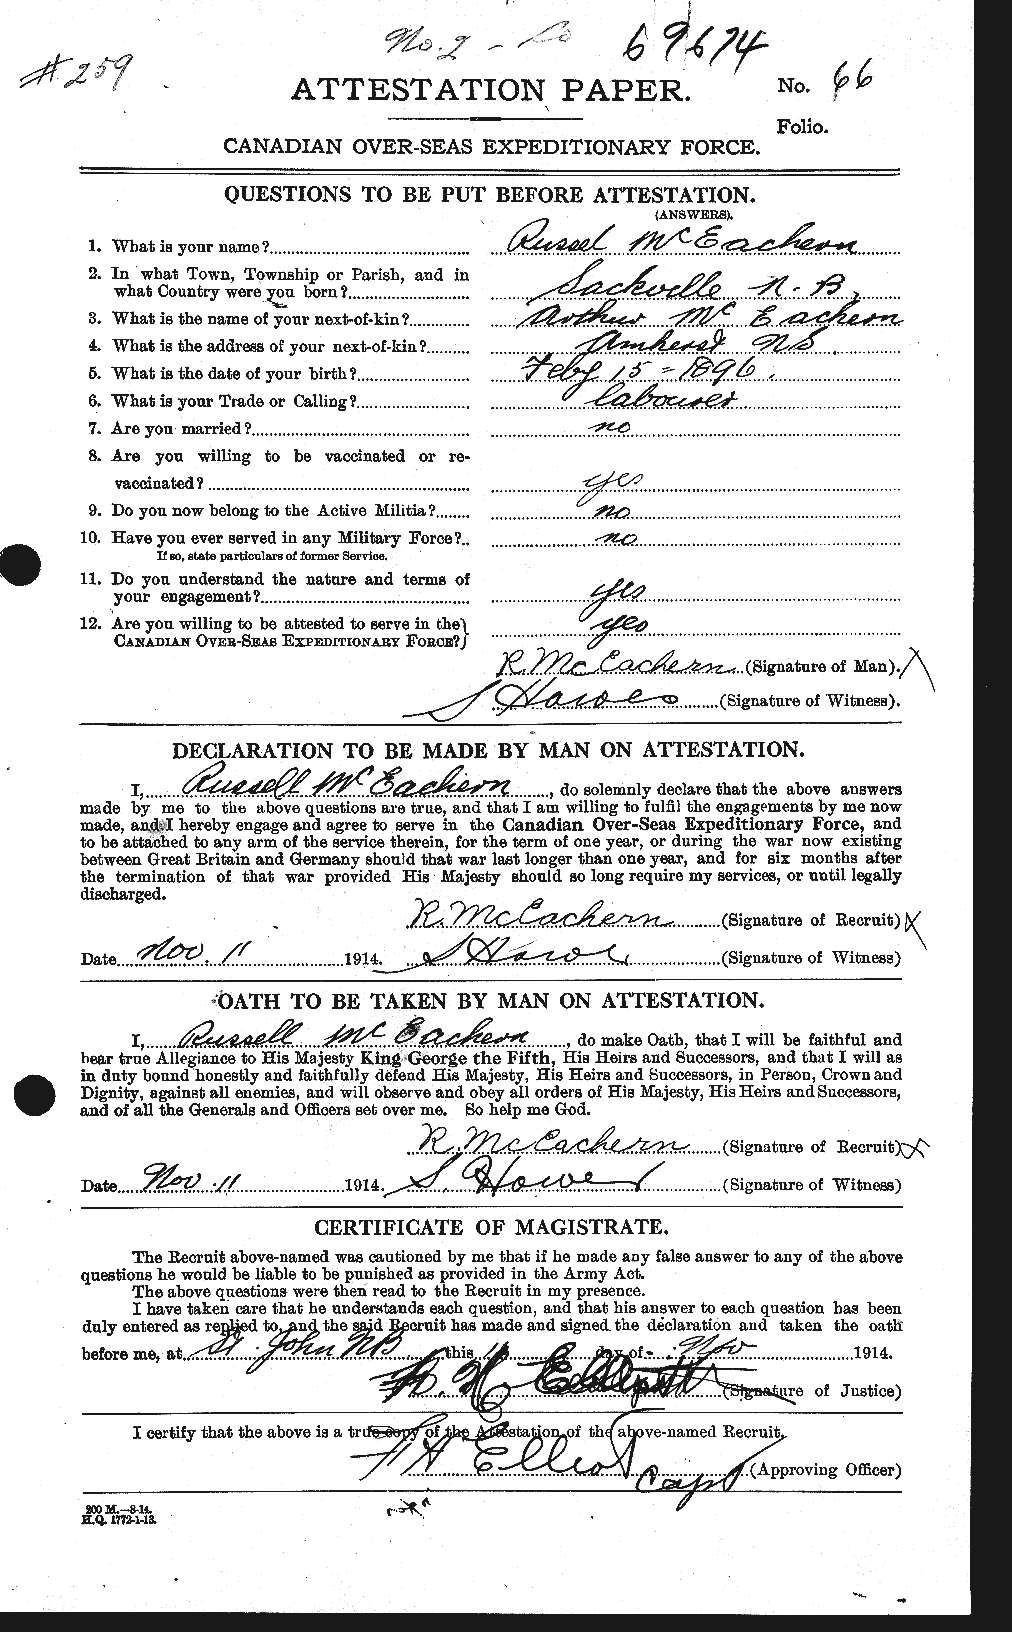 Personnel Records of the First World War - CEF 521907a